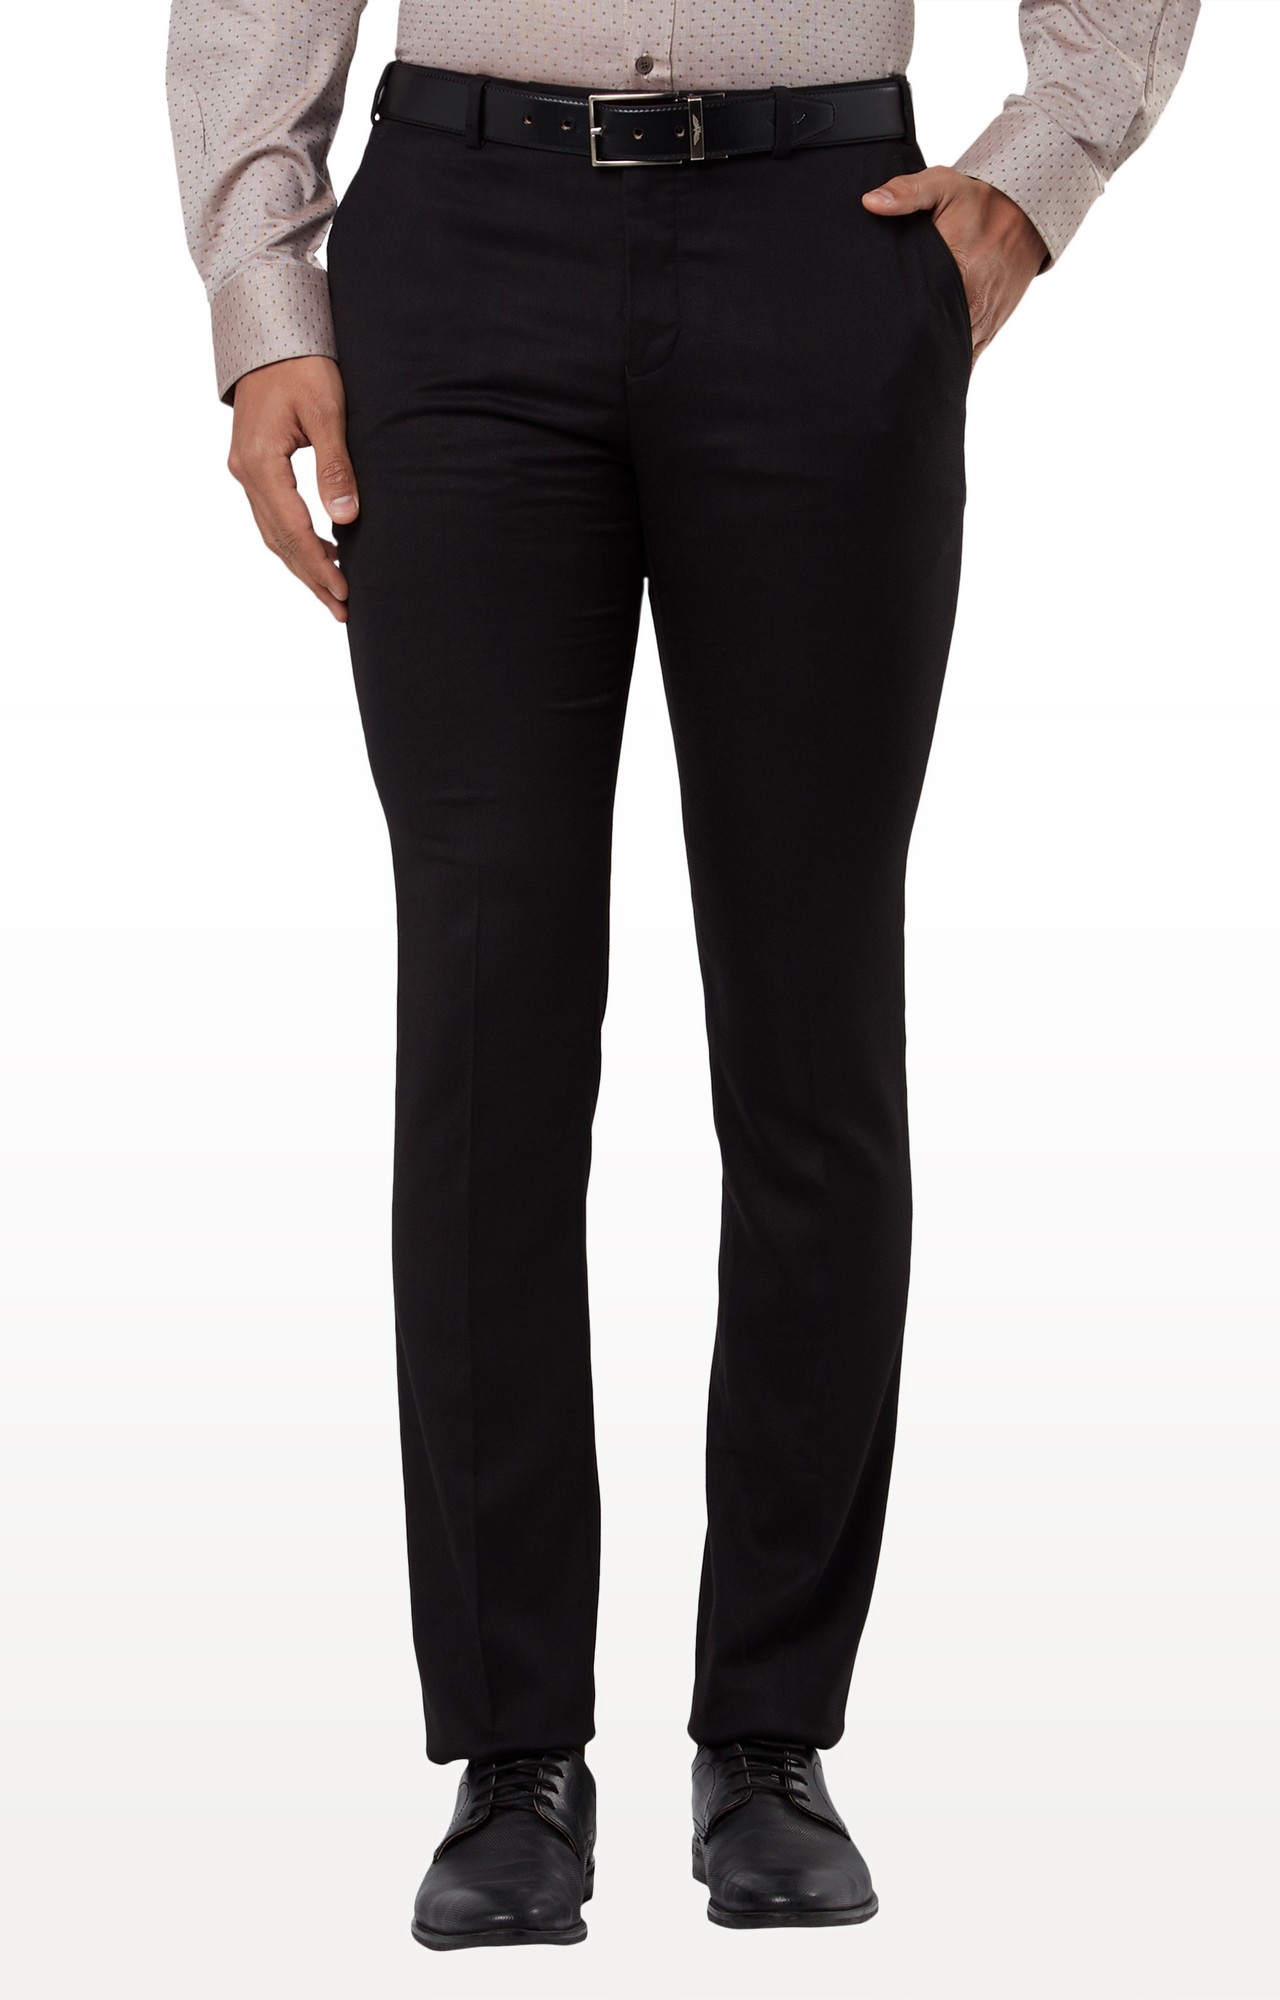 Black Flat Front Formal Trousers